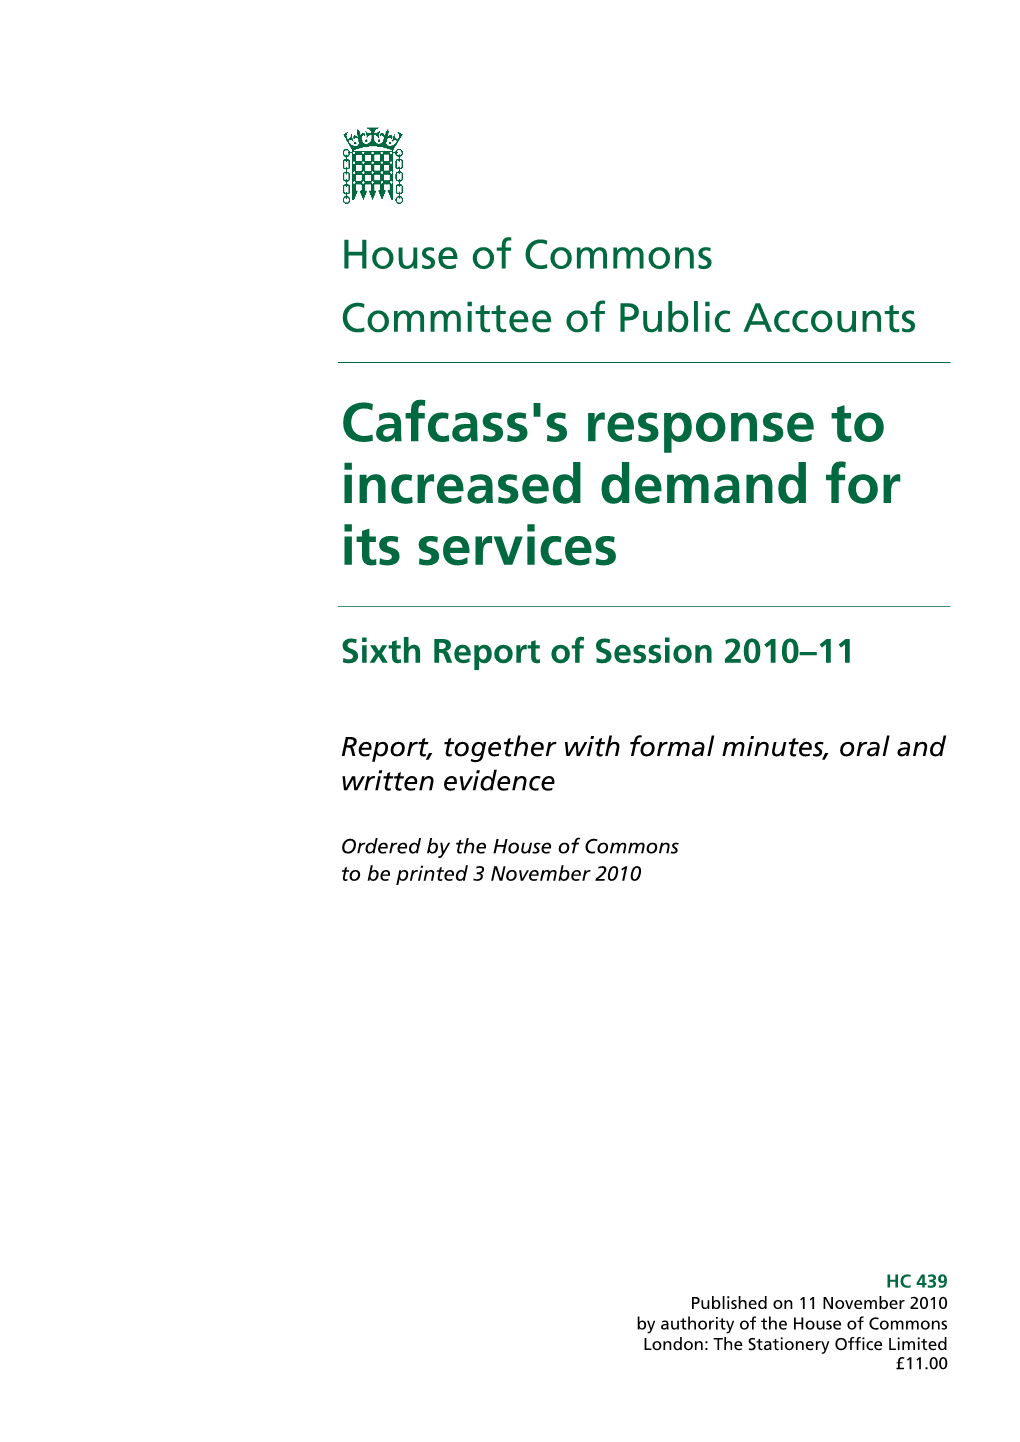 Cafcass's Response to Increased Demand for Its Services